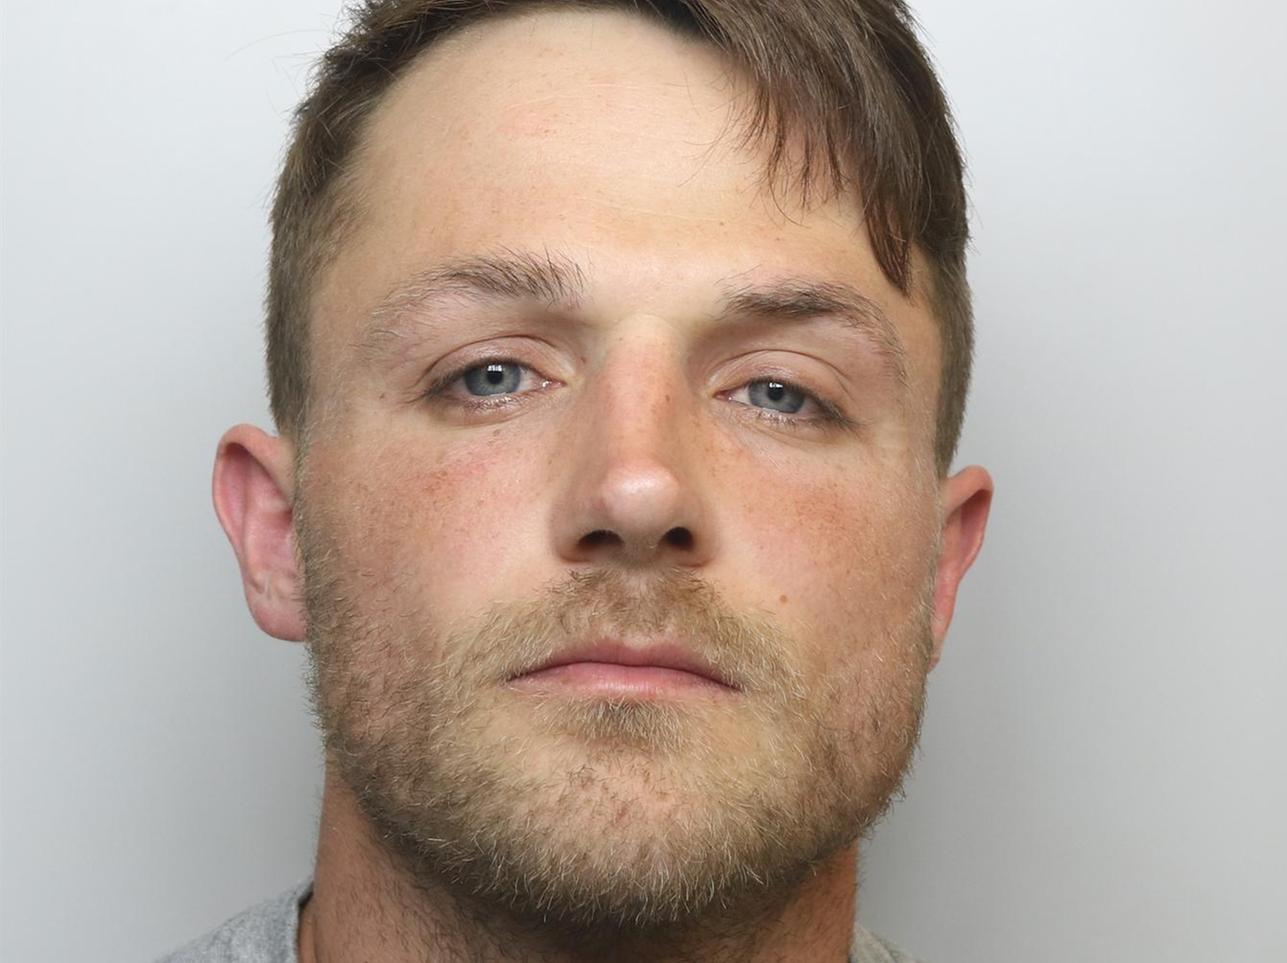 Kieran Marshall was involved in the conspiracy to steal from lorries and also took part in the ram raid at Hyman's jewellers. He was locked up for 14 and a half years.